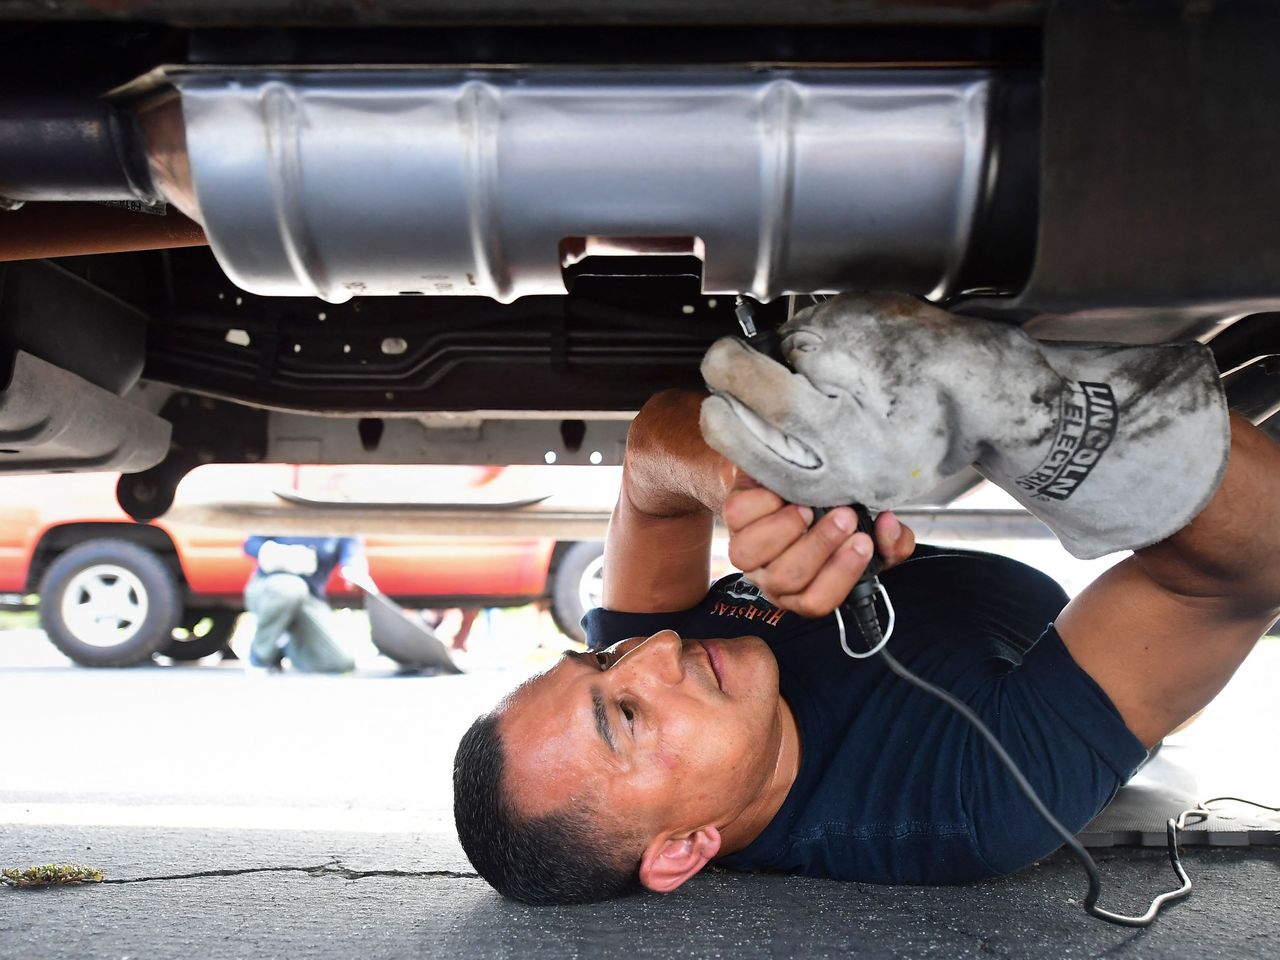 Stolen Catalytic Converter: Here's What You Should Do